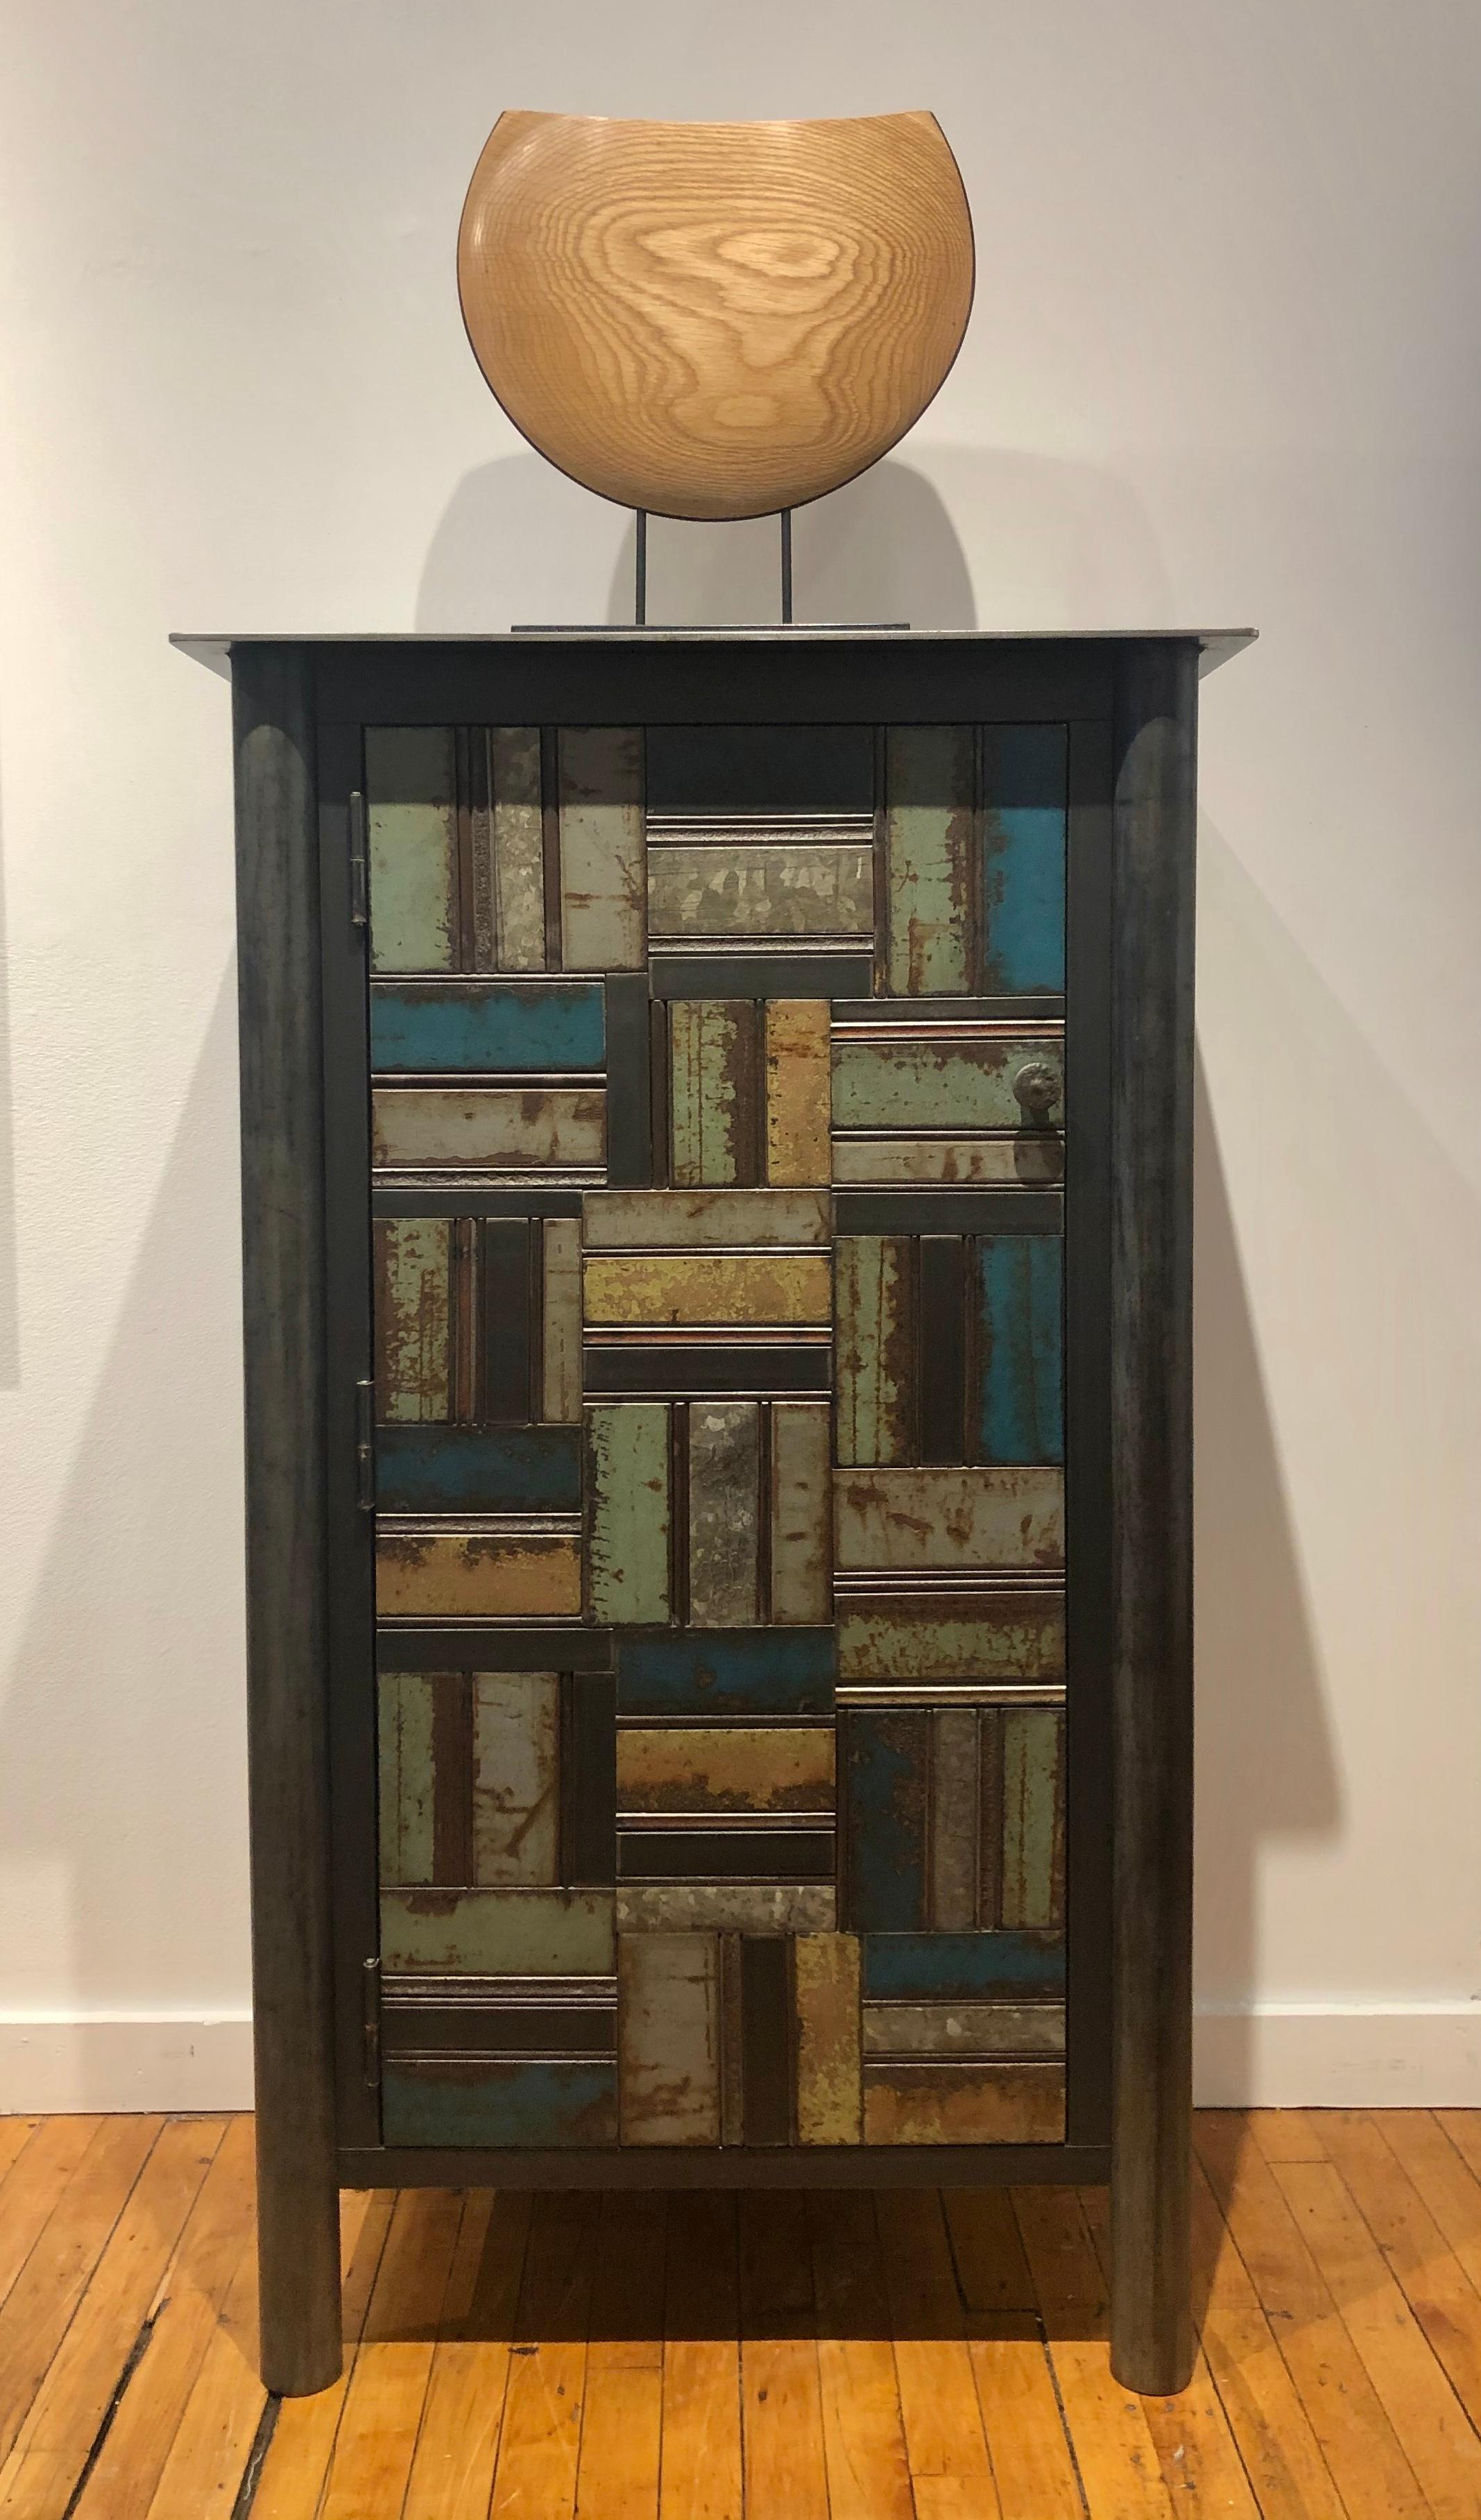 This is a totally functional one door cupboard. It is created from hot rolled steel and found steel. The legs are made from salvaged pipe. The panels on the door fronts and sides are made from salvaged pieces of steel with the original paint and